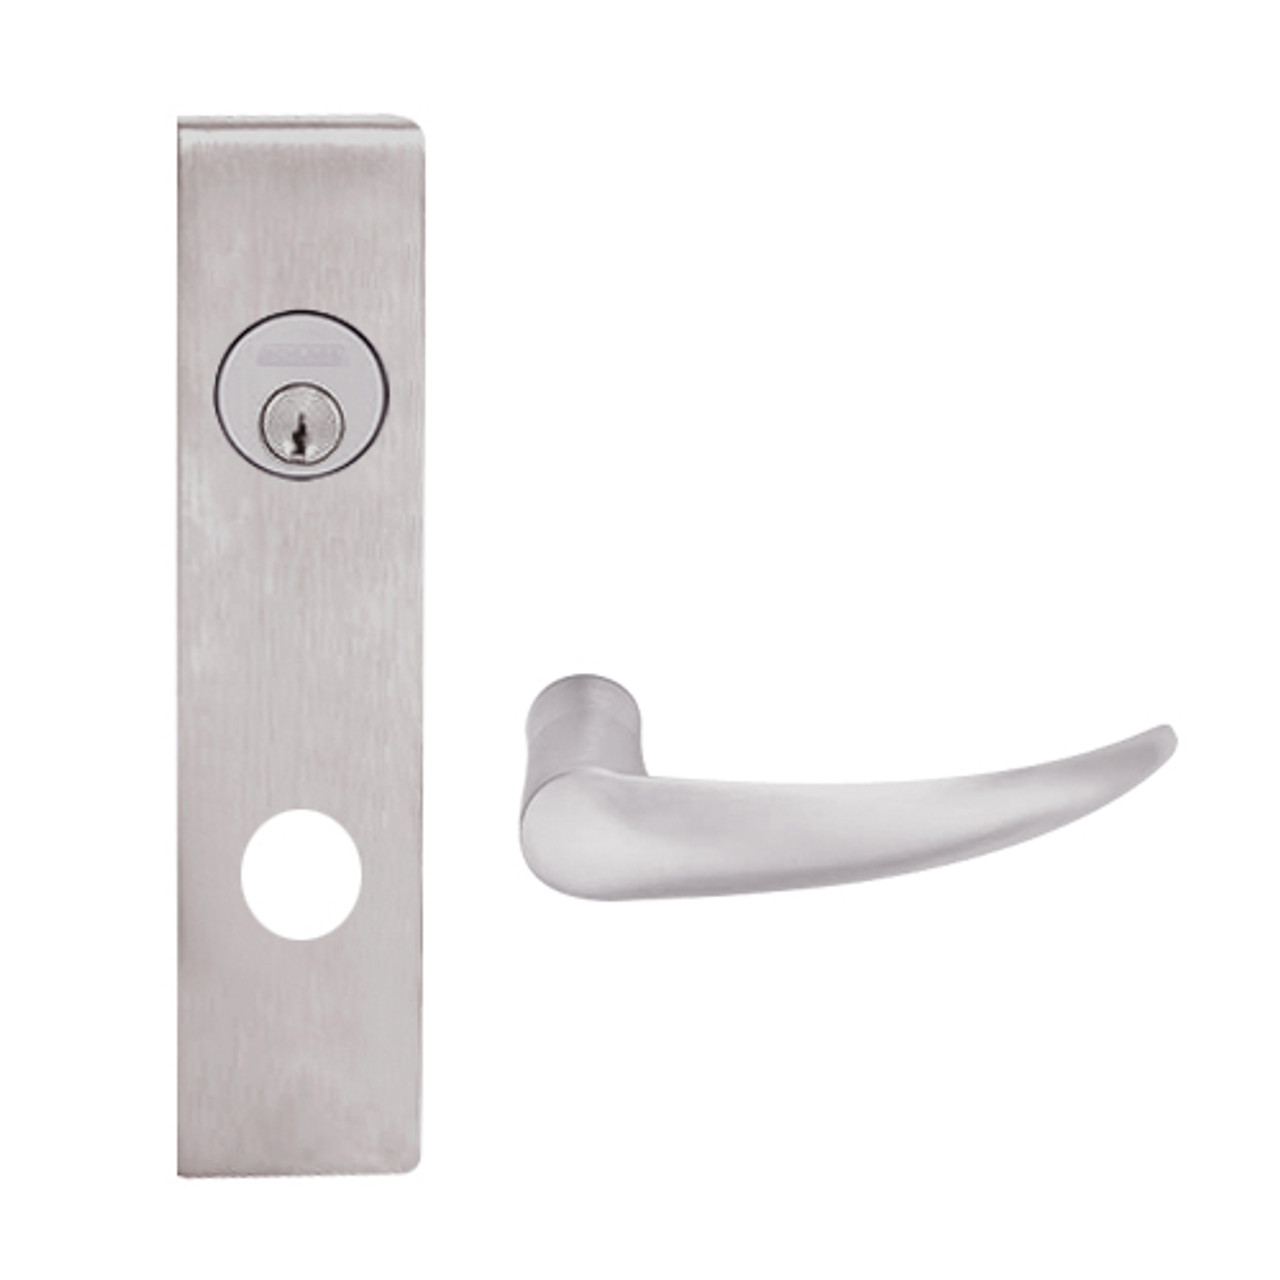 L9026L-OME-L-630 Schlage L Series Less Cylinder Exit Lock with Cylinder Commercial Mortise Lock with Omega Lever Design in Satin Stainless Steel